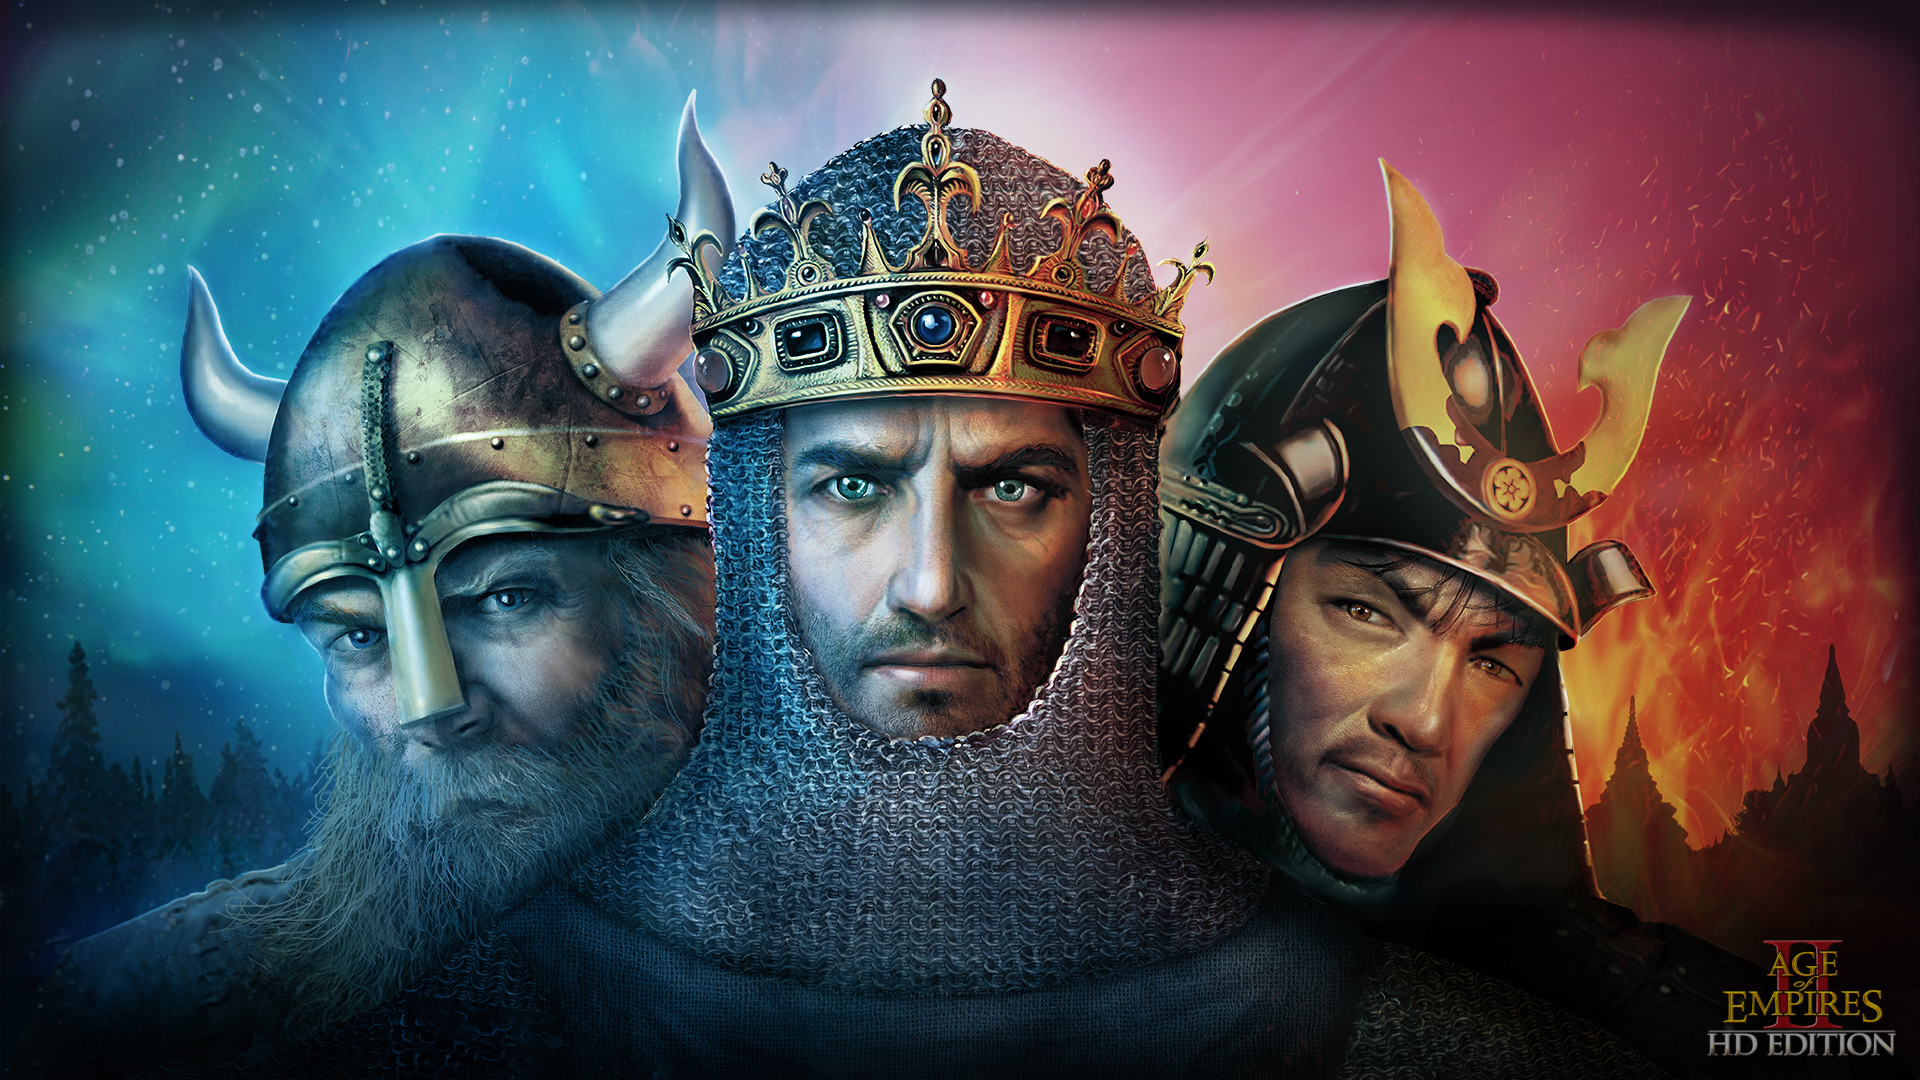 Age Of Empires wallpaper, Video Game, HQ Age Of Empires pictureK Wallpaper 2019